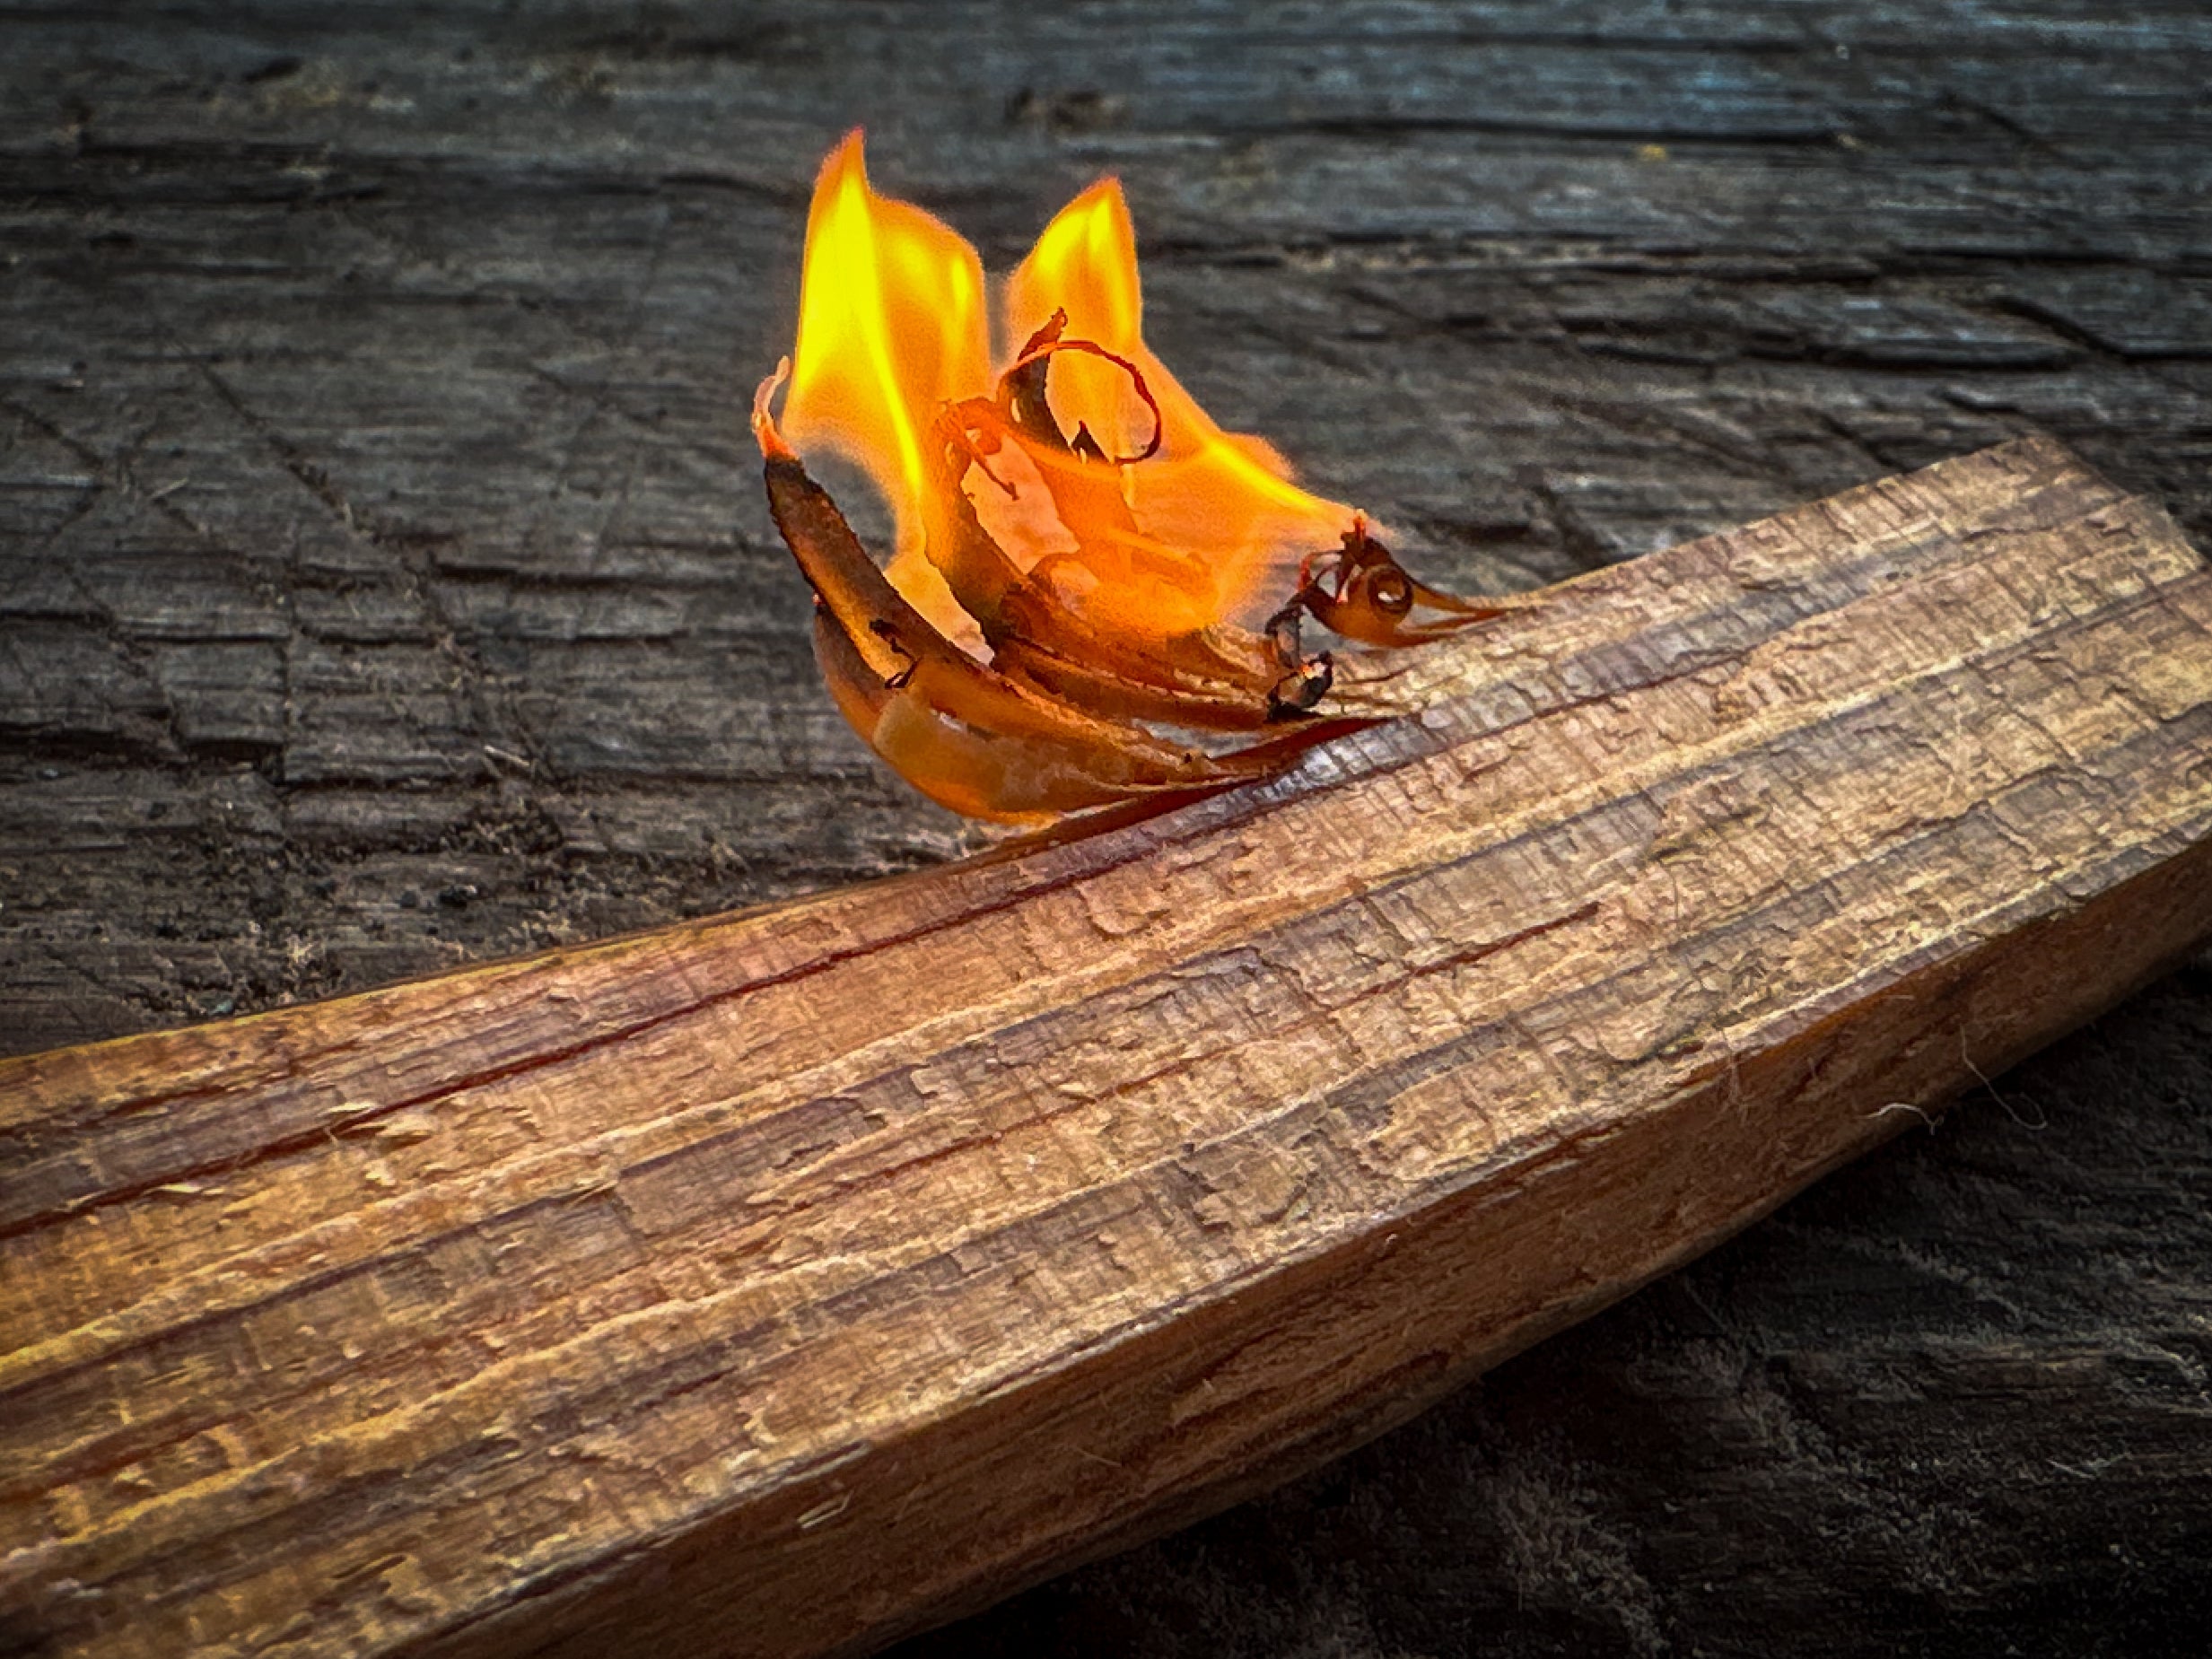 A small flame burns on a section of cedar wood